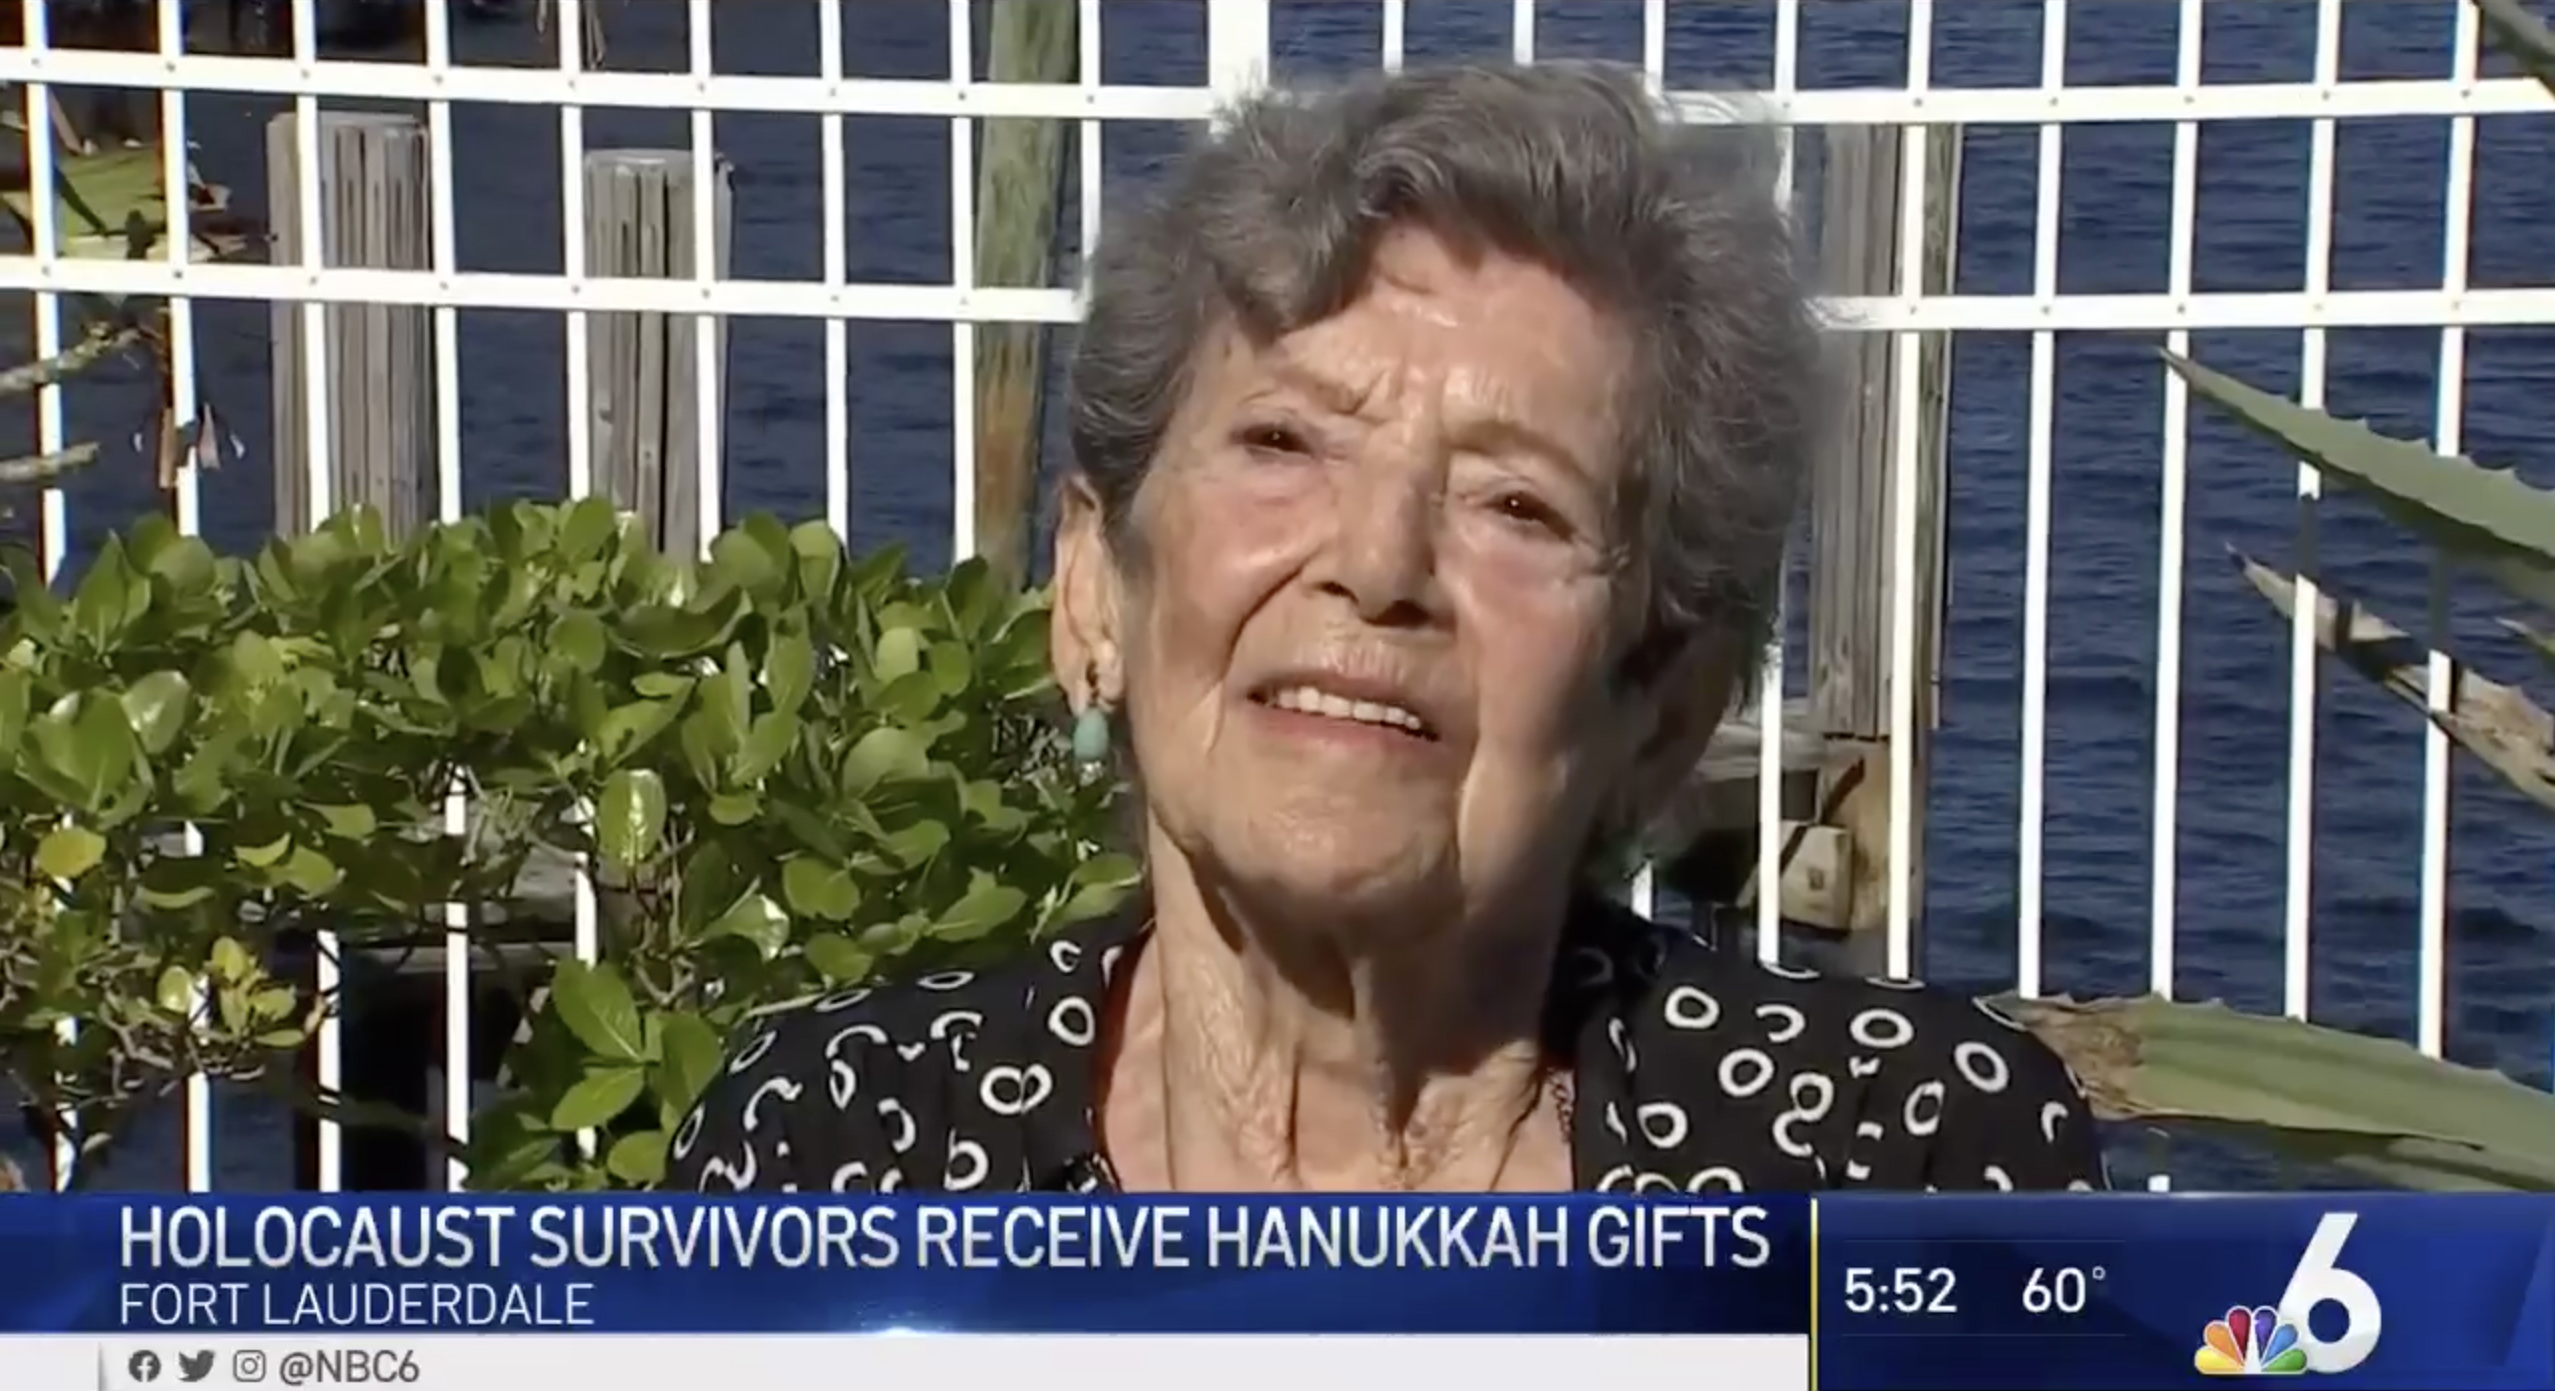 More than 600 Holocaust survivors received Hanukkah gifts